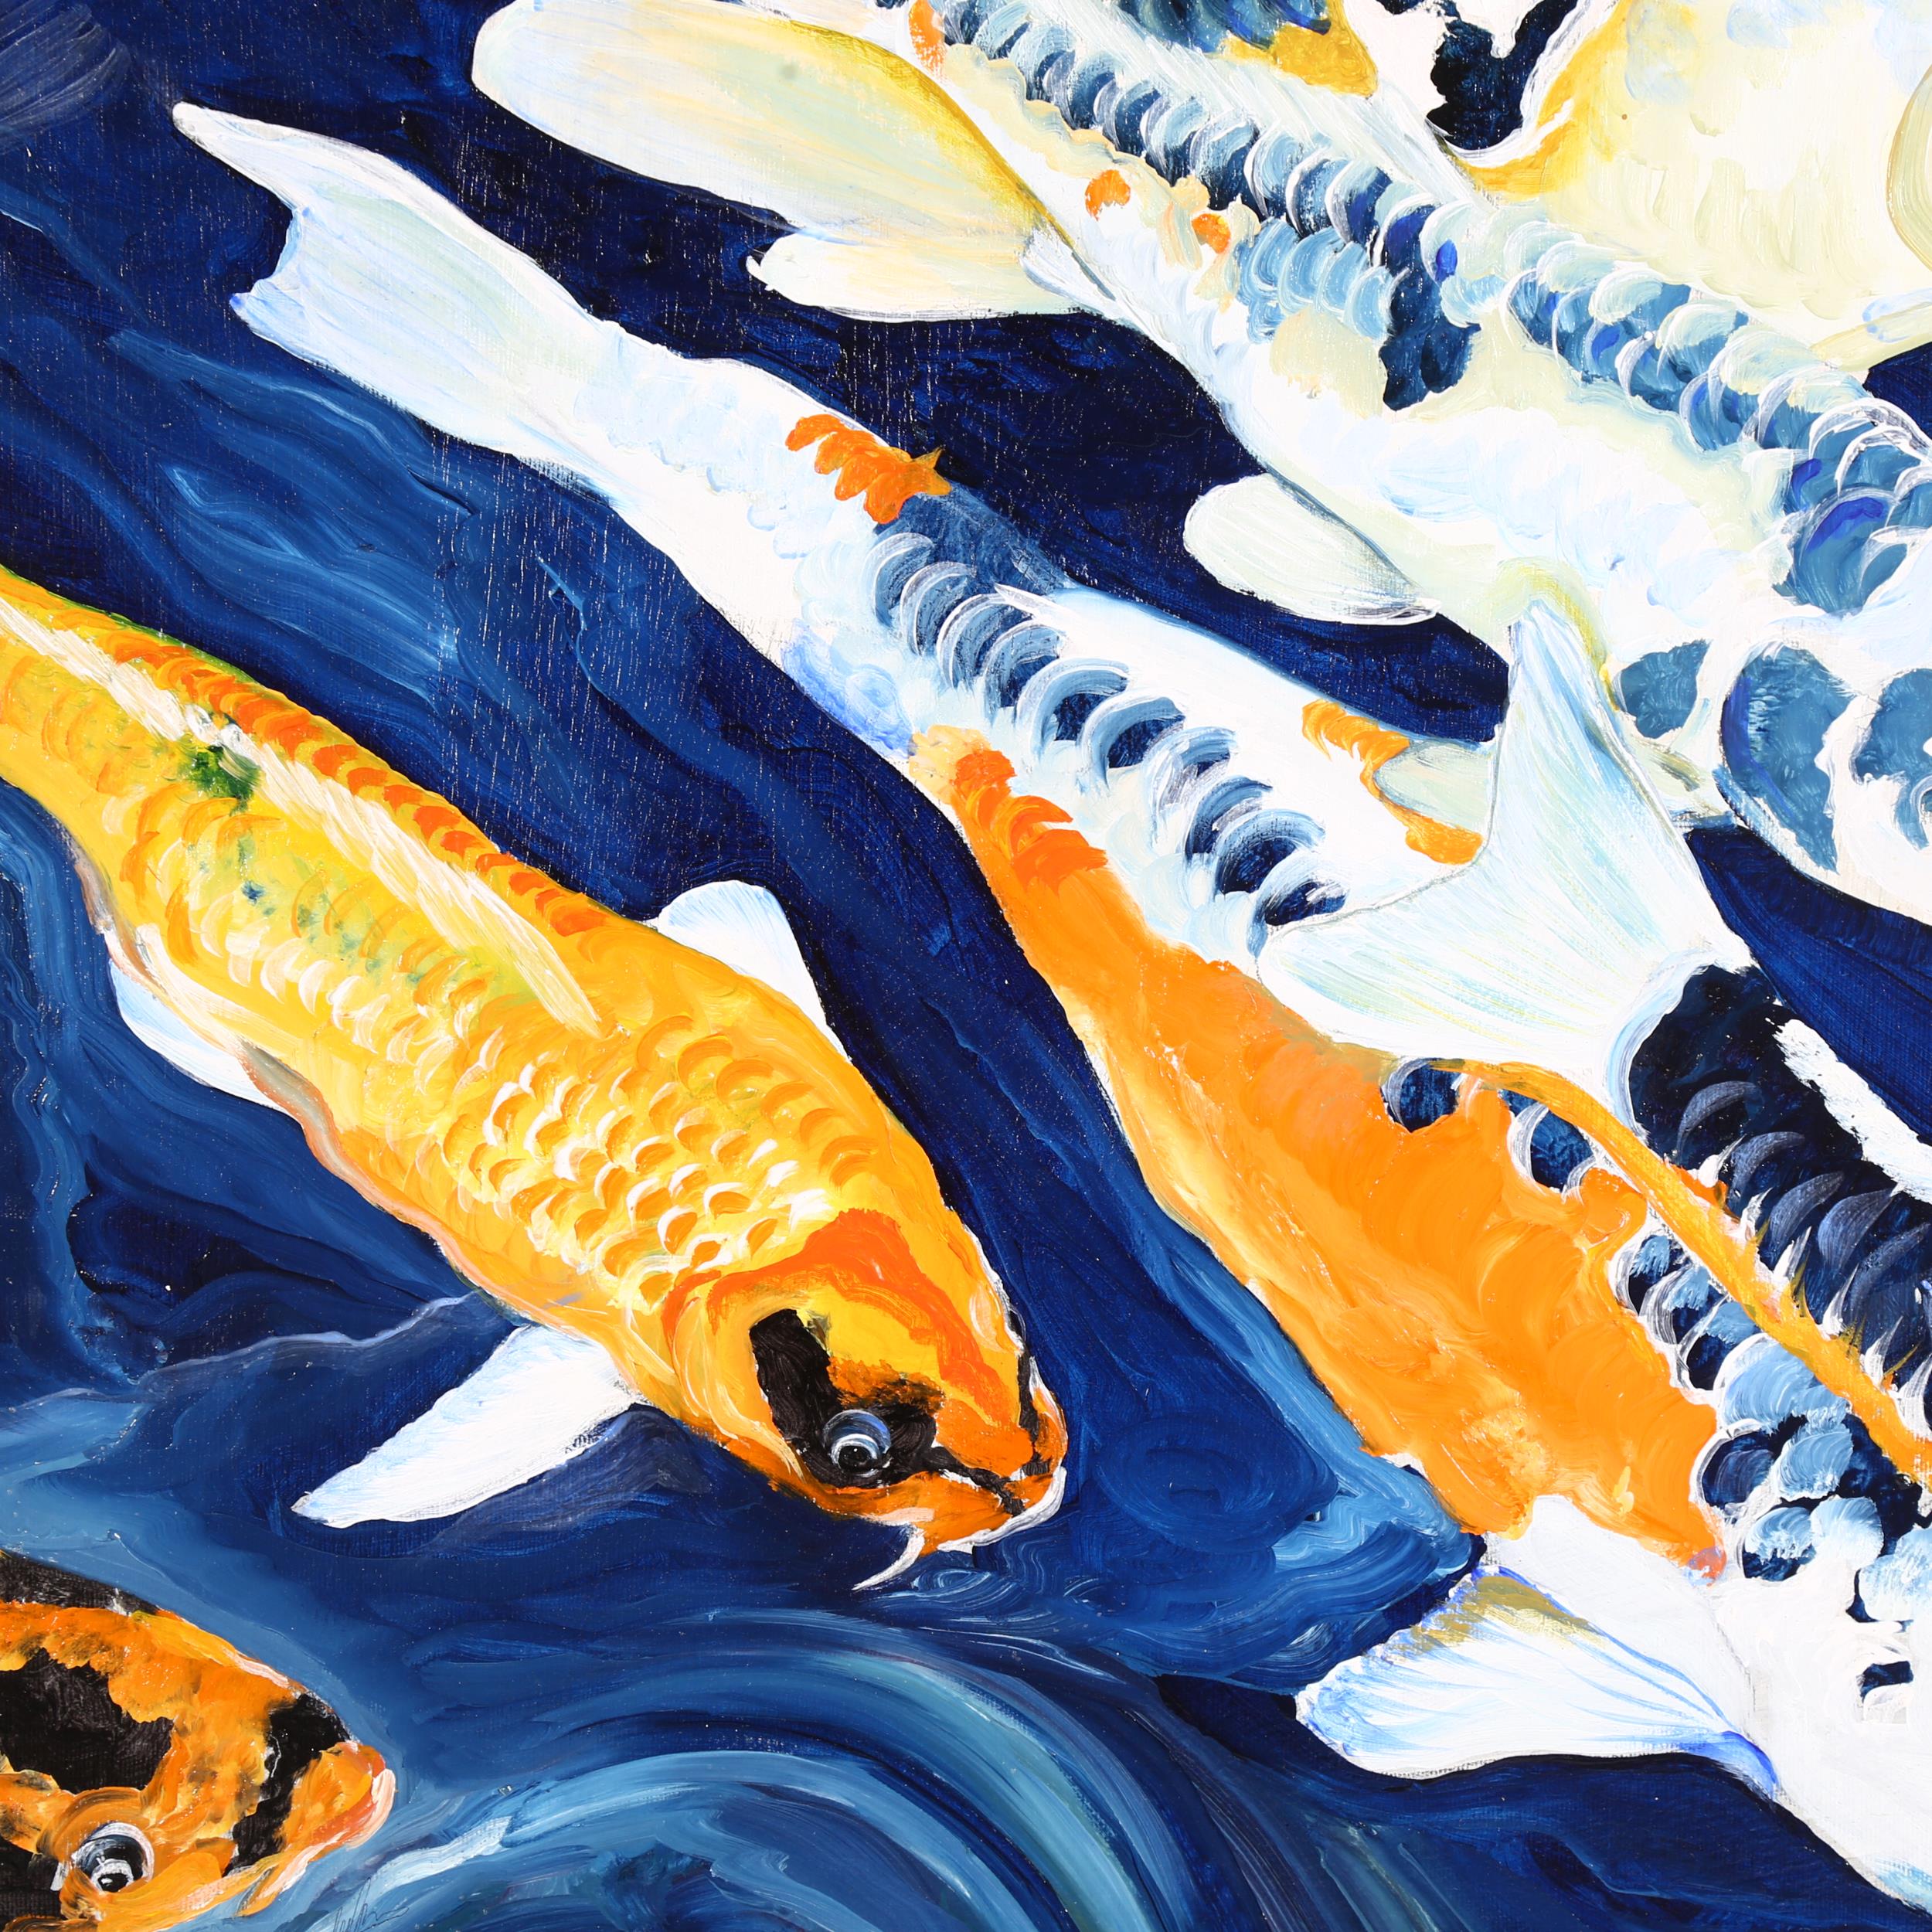 Clive Fredriksson, oil on board, shoal of Koi carp, 87cm x 74cm overall, framed - Image 2 of 2